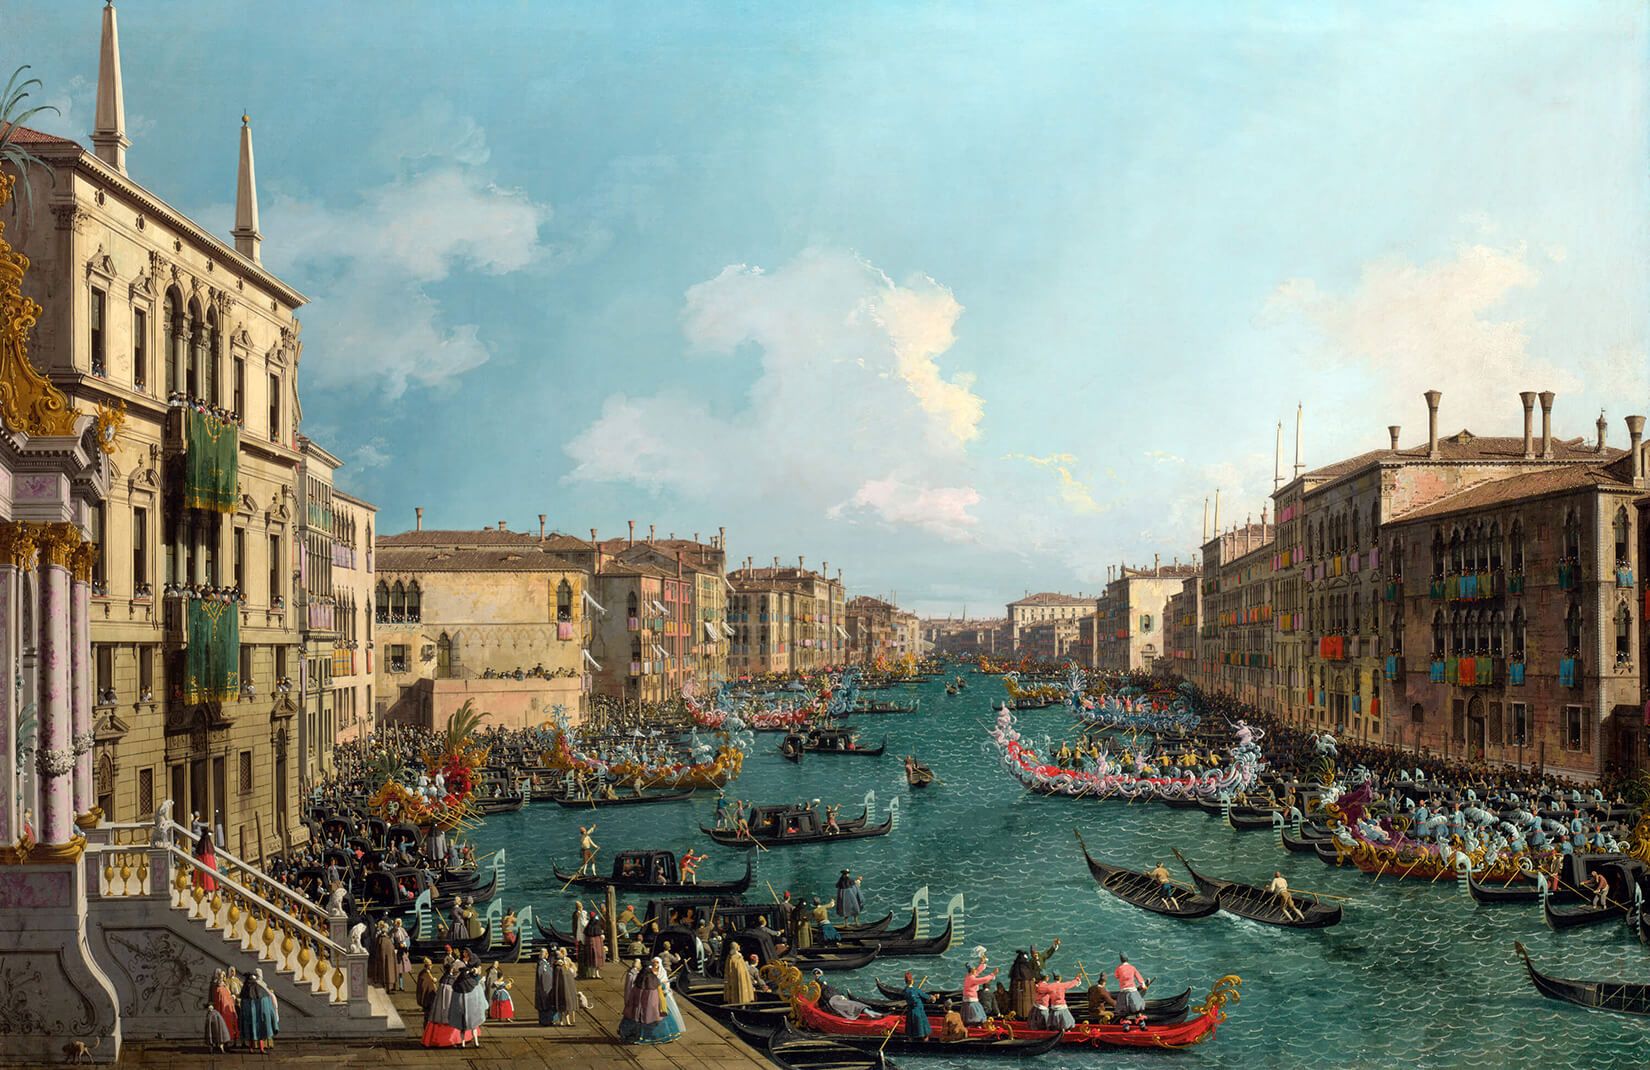 A Regatta On The Grand Canal by Canaletto Wallpaper Mural